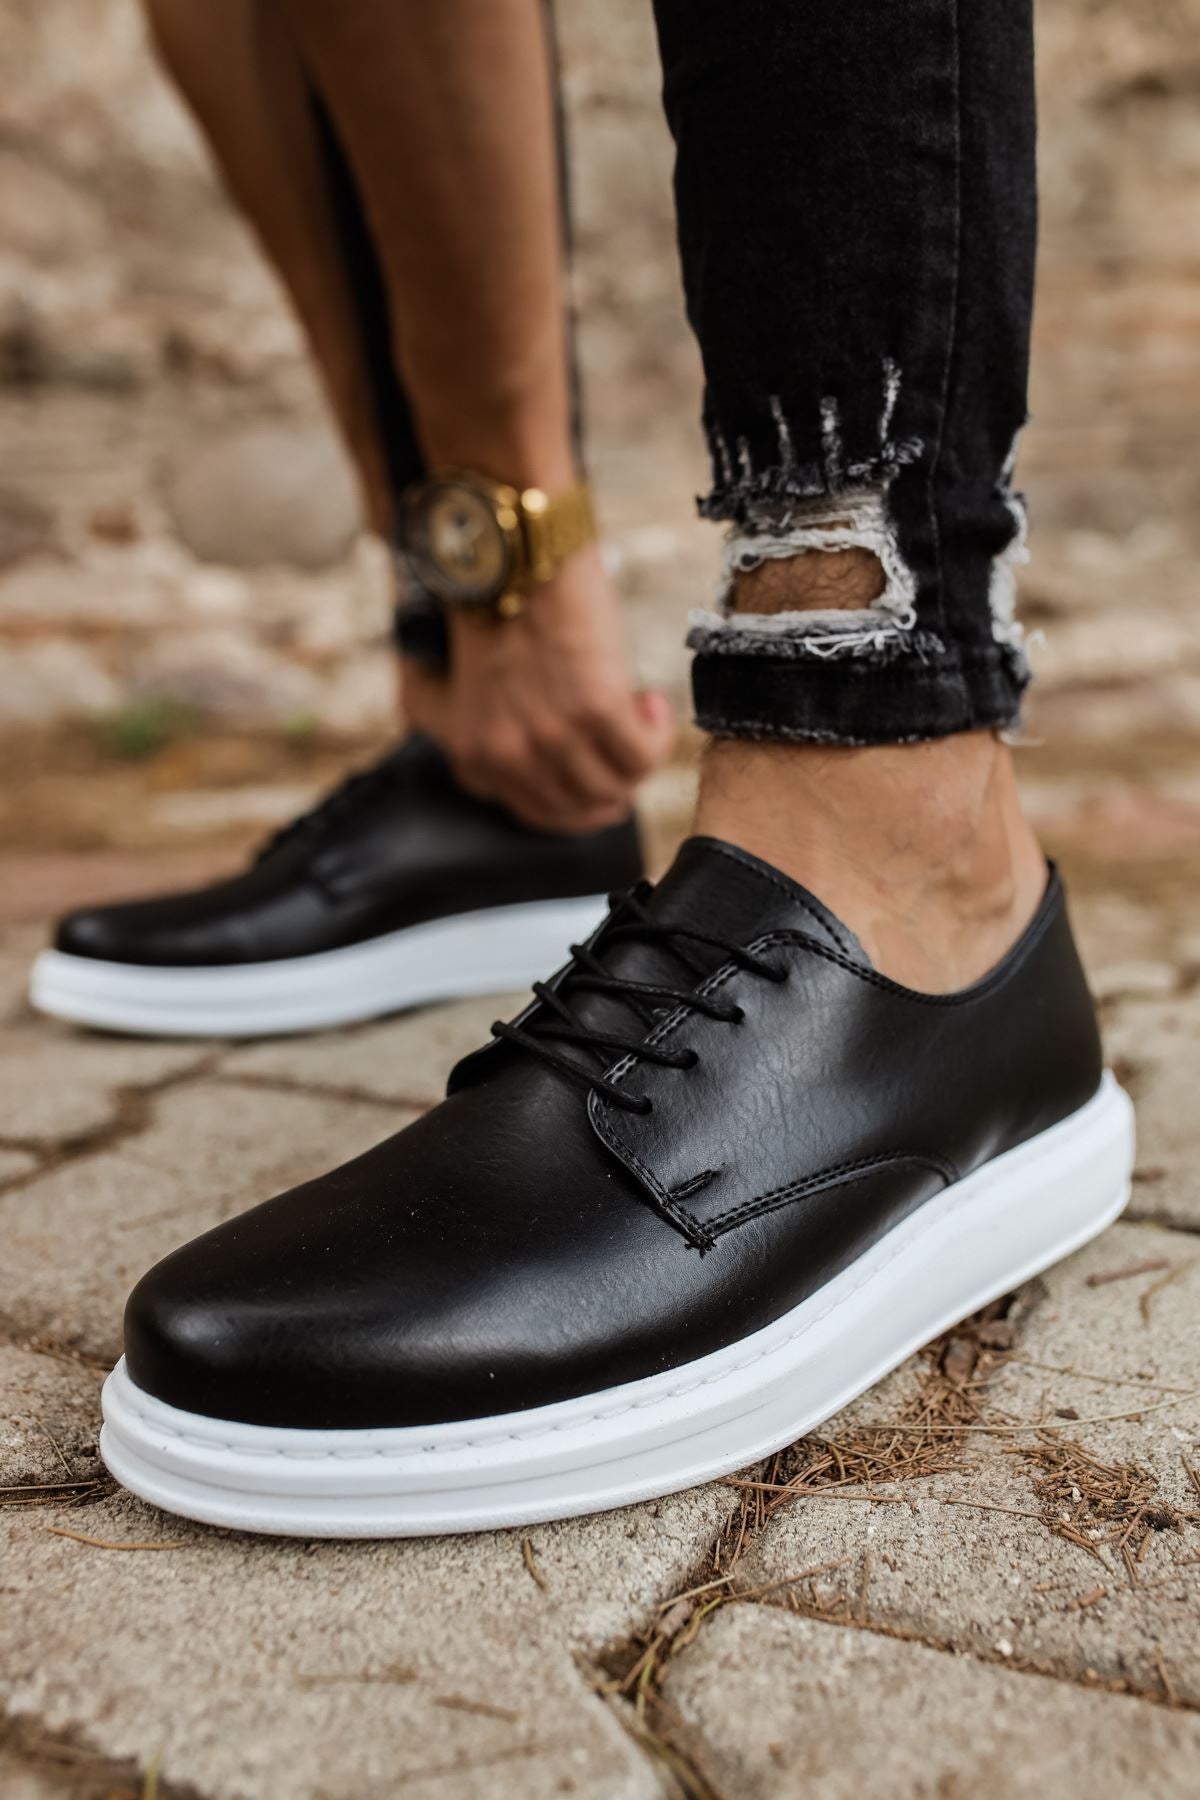 CH003 Men's Black-White Sole Matte Leather Casual Classic Sneaker Shoes - STREETMODE ™